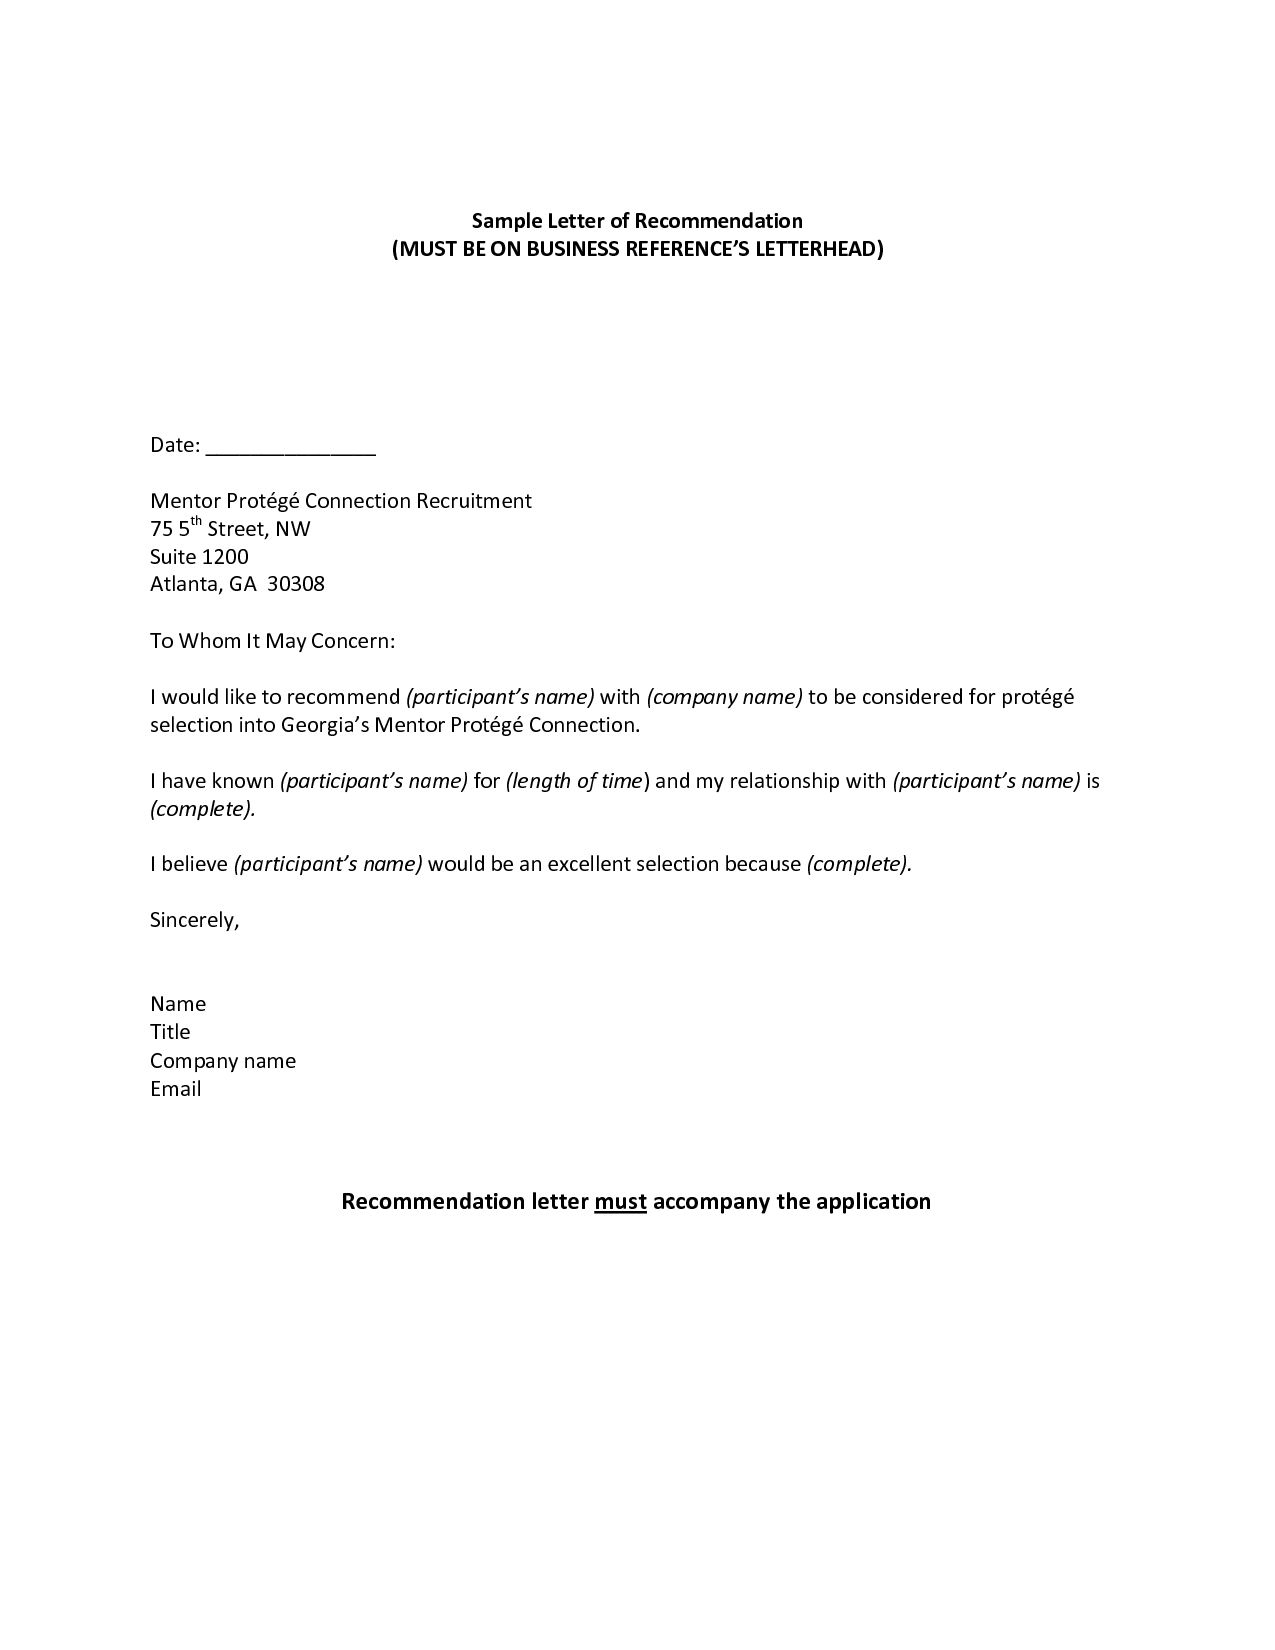 Professional Reference Sample Recommendation Letter Jos inside dimensions 1275 X 1650